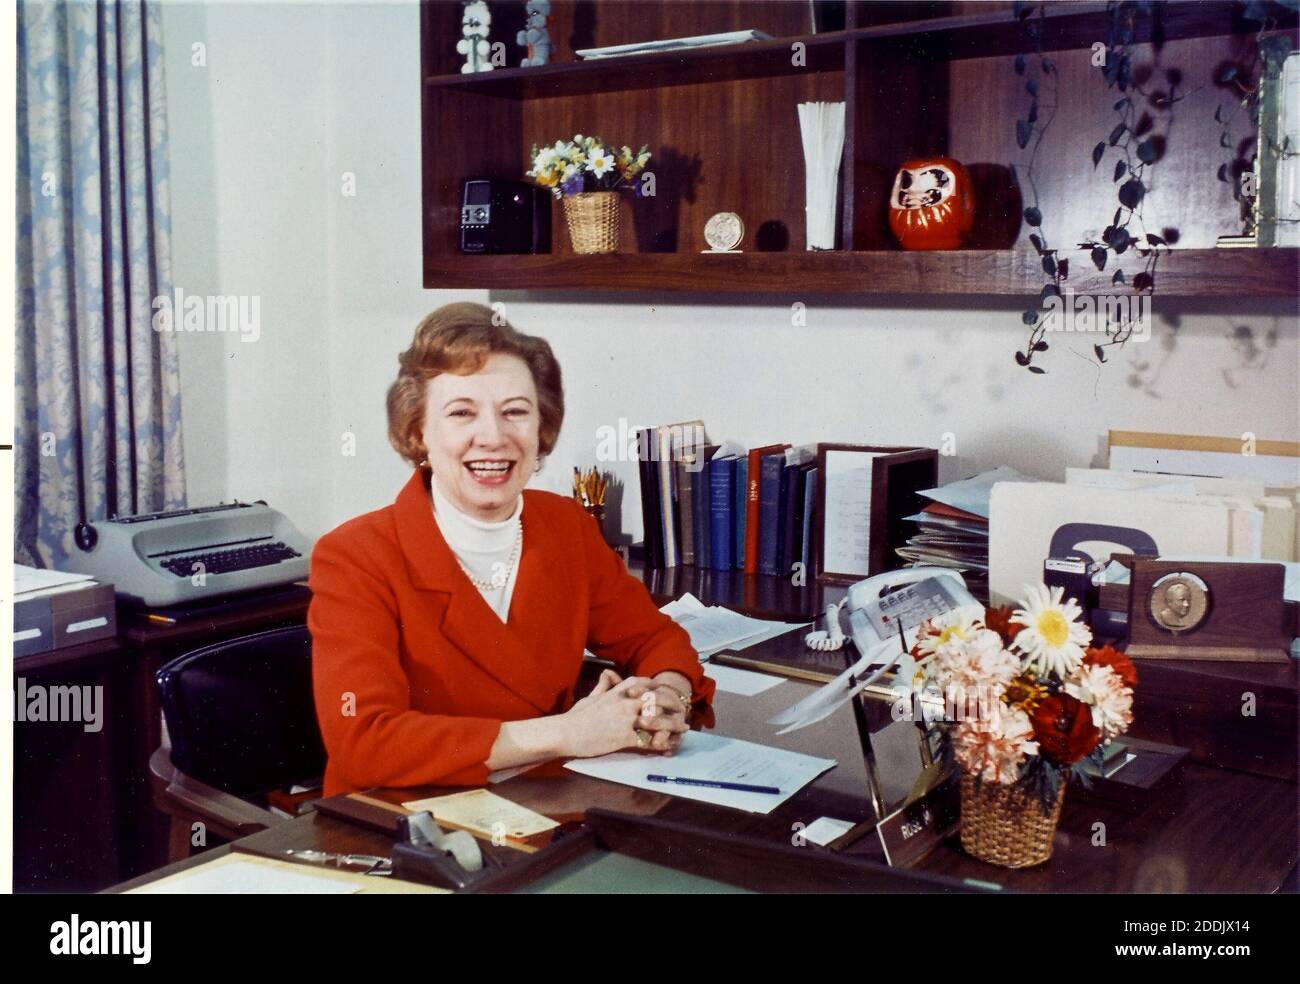 Portrait of Rosemary Woods taken at her desk at the White House in Washington, D.C. on April 14, 1969. At the time, Ms. Woods was the personal secretary to United States President Richard M. Nixon. She was most remembered for the infamous 18 1/2 minute gap in one of the Nixon tape recordings that was crucial to the Watergate investigation that led to Nixon's resignation. Ms. Woods passed away on January 24, 2005 at age 87 in an Ohio nursing home. Handout photo by White House via CNP/ABACAPRESS.COM Stock Photo